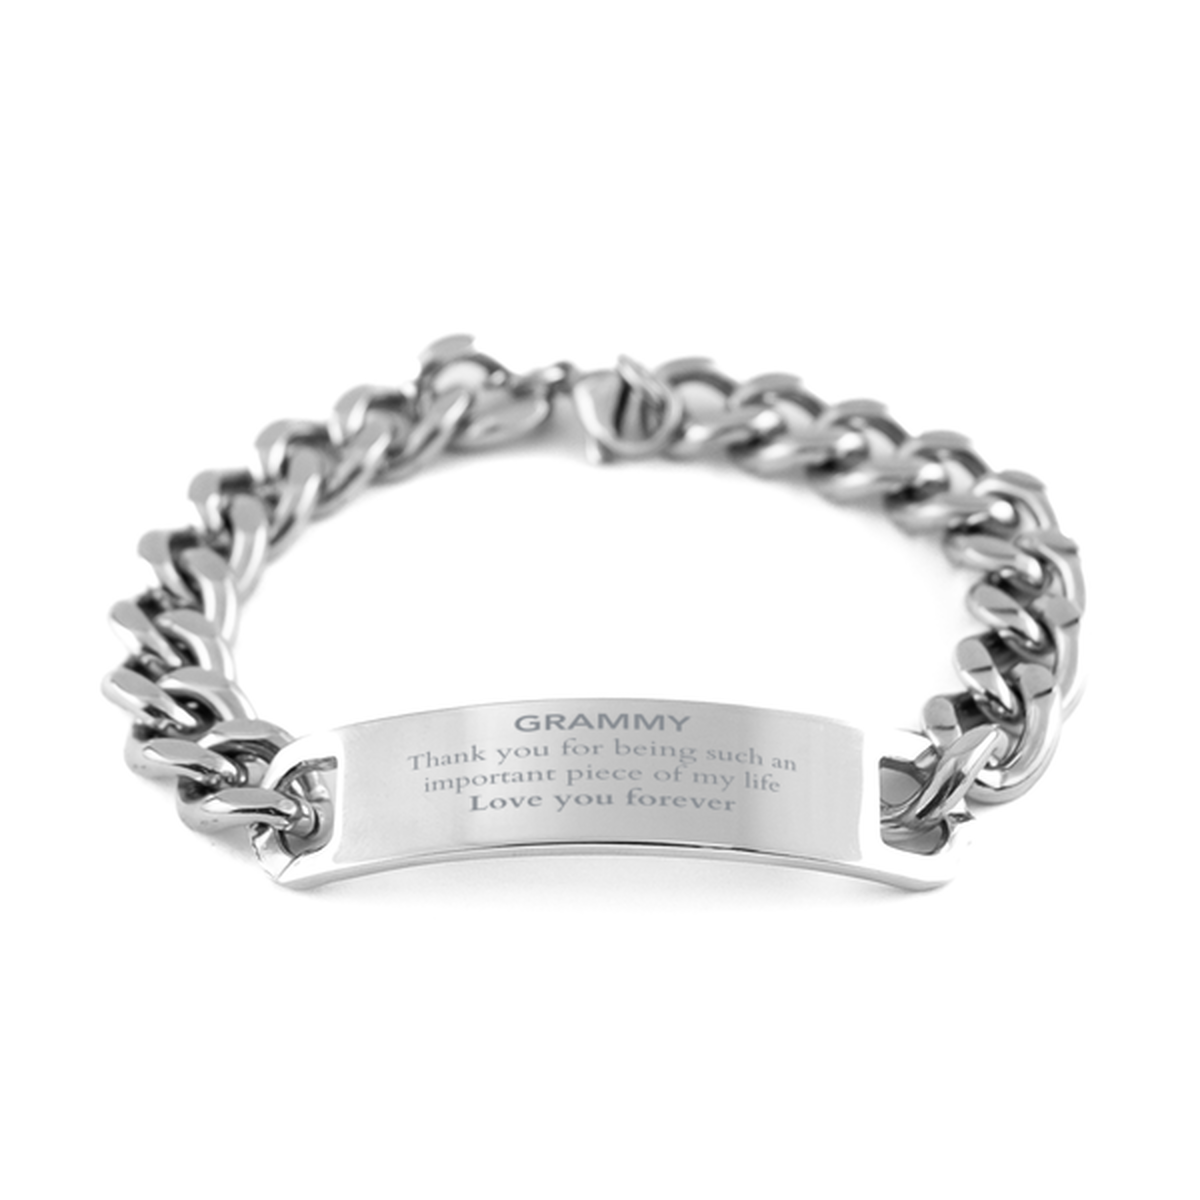 Appropriate Grammy Cuban Chain Stainless Steel Bracelet Epic Birthday Gifts for Grammy Thank you for being such an important piece of my life Grammy Christmas Mothers Fathers Day